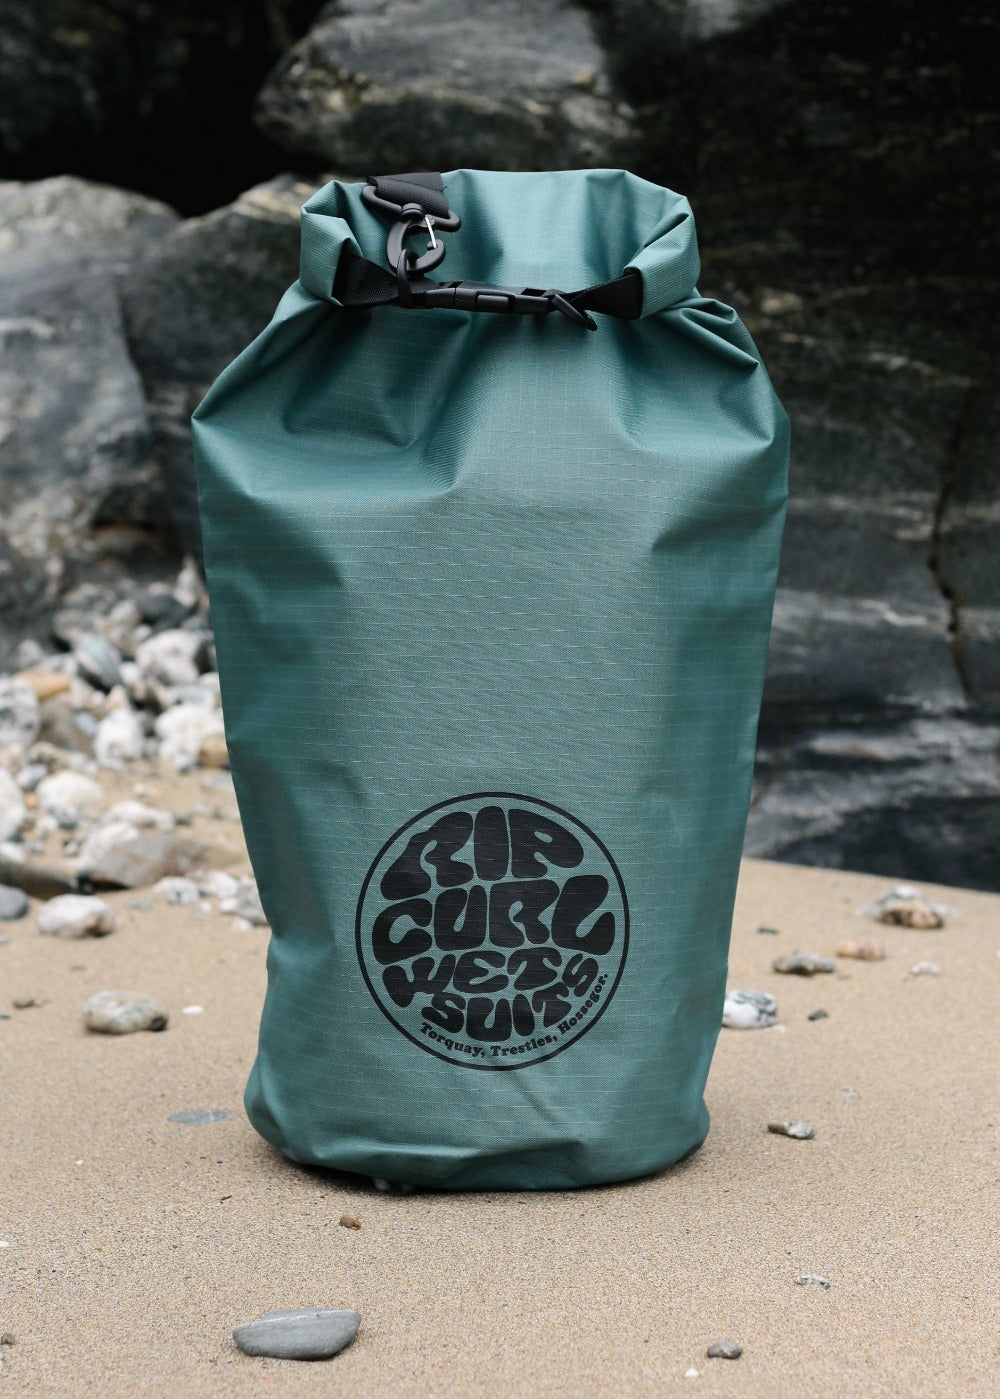 Load image into Gallery viewer, Surf Series 20L Barrel Bag by Rip Curl
